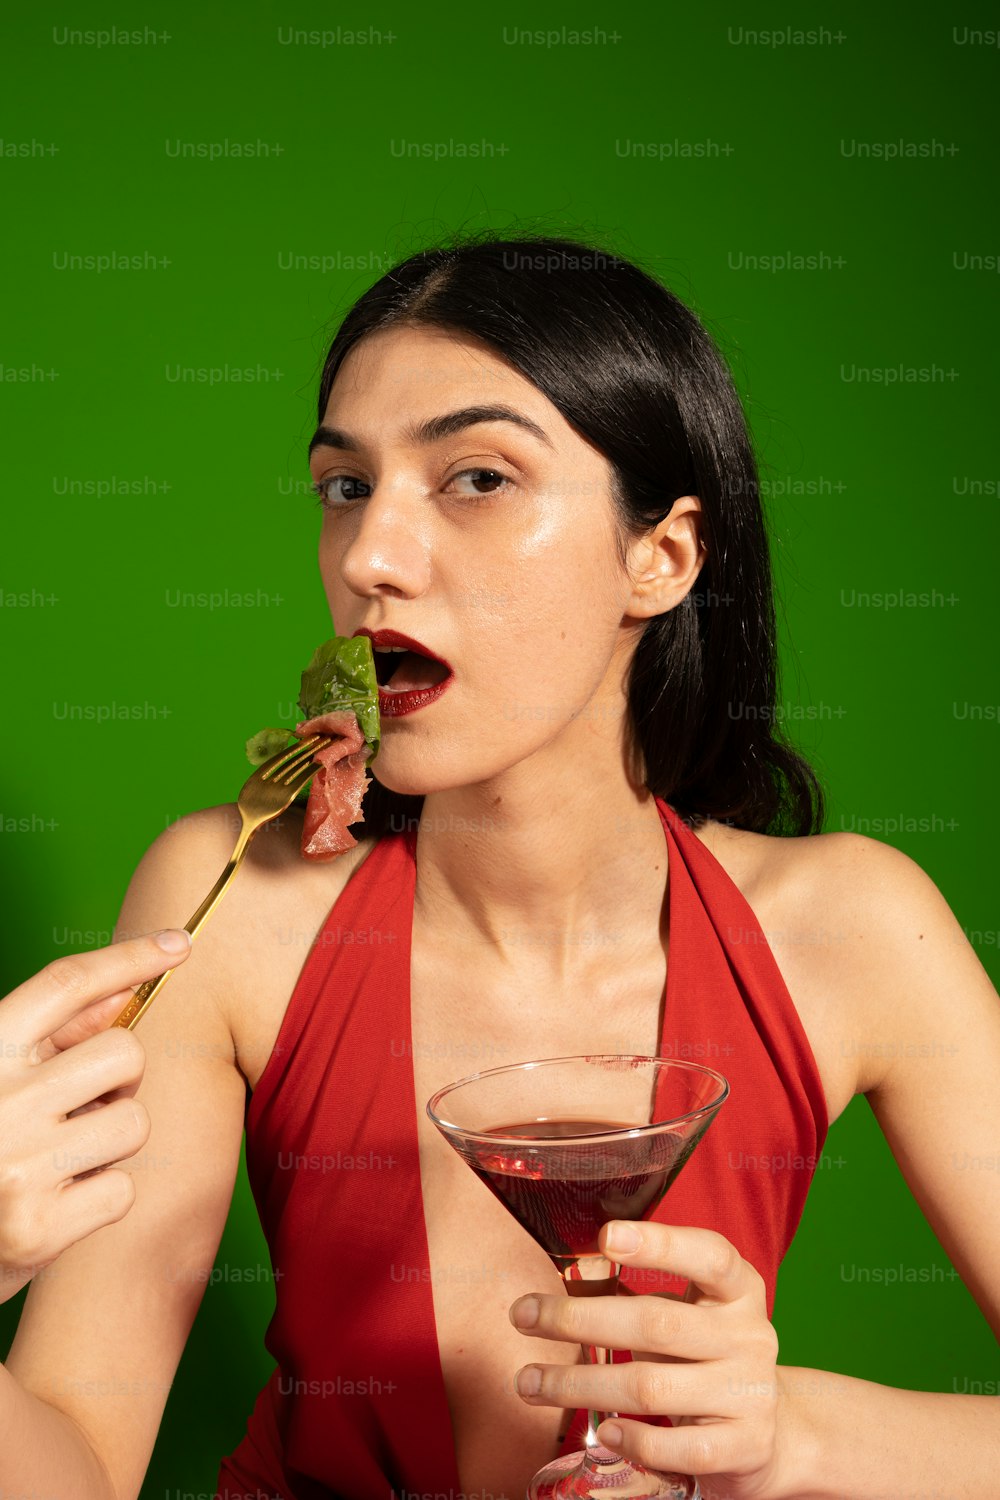 a woman in a red dress eating a piece of food